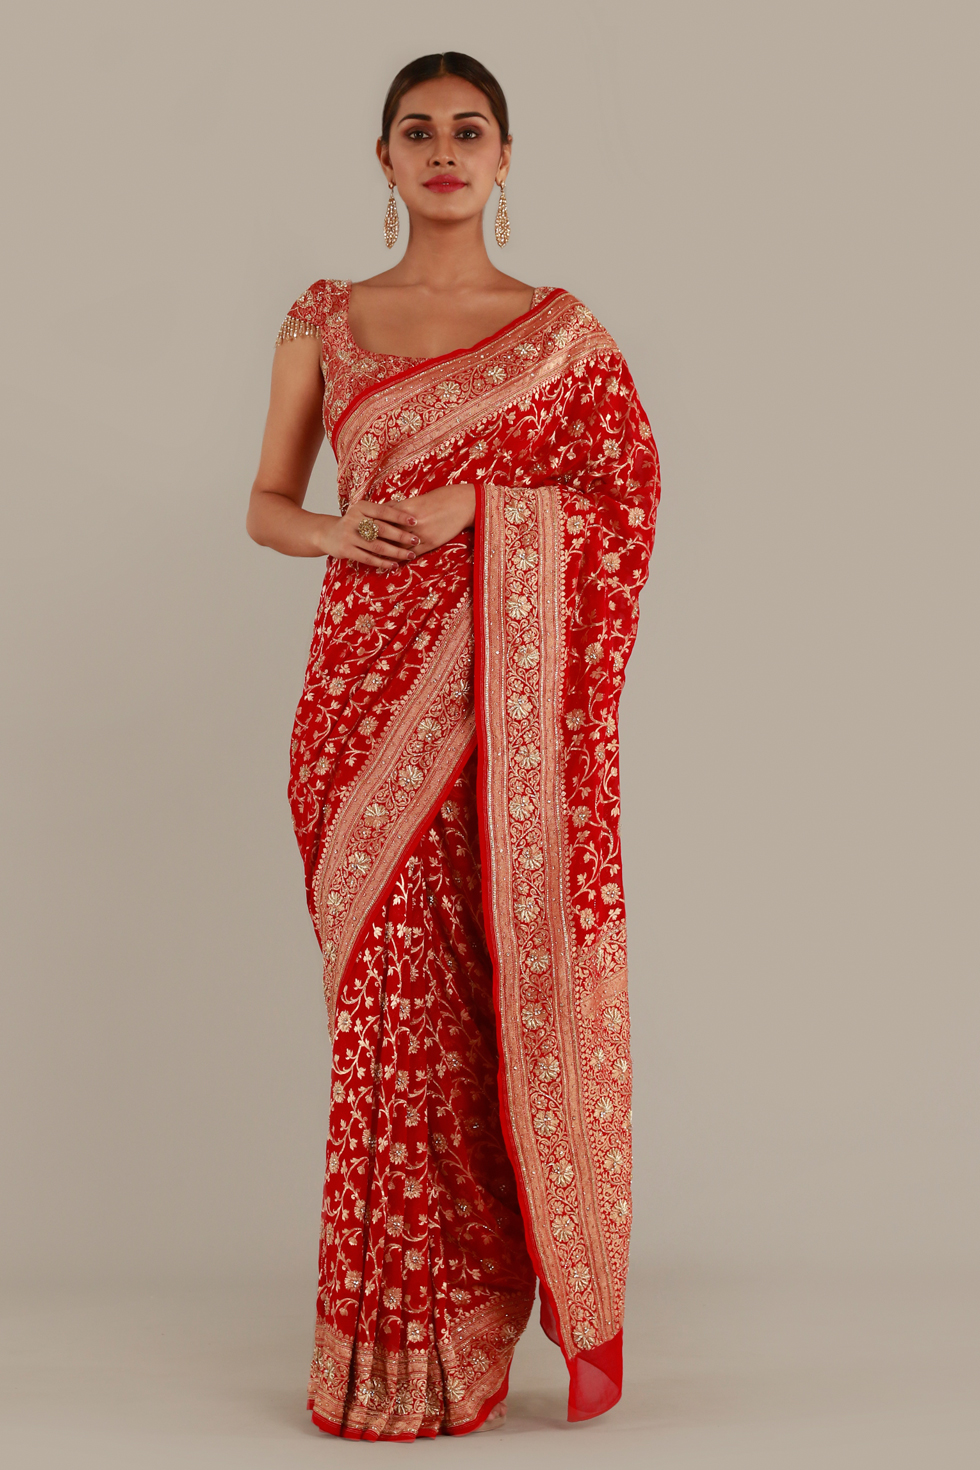 Off White Peplum Blouse with Red Saree Festive Wear